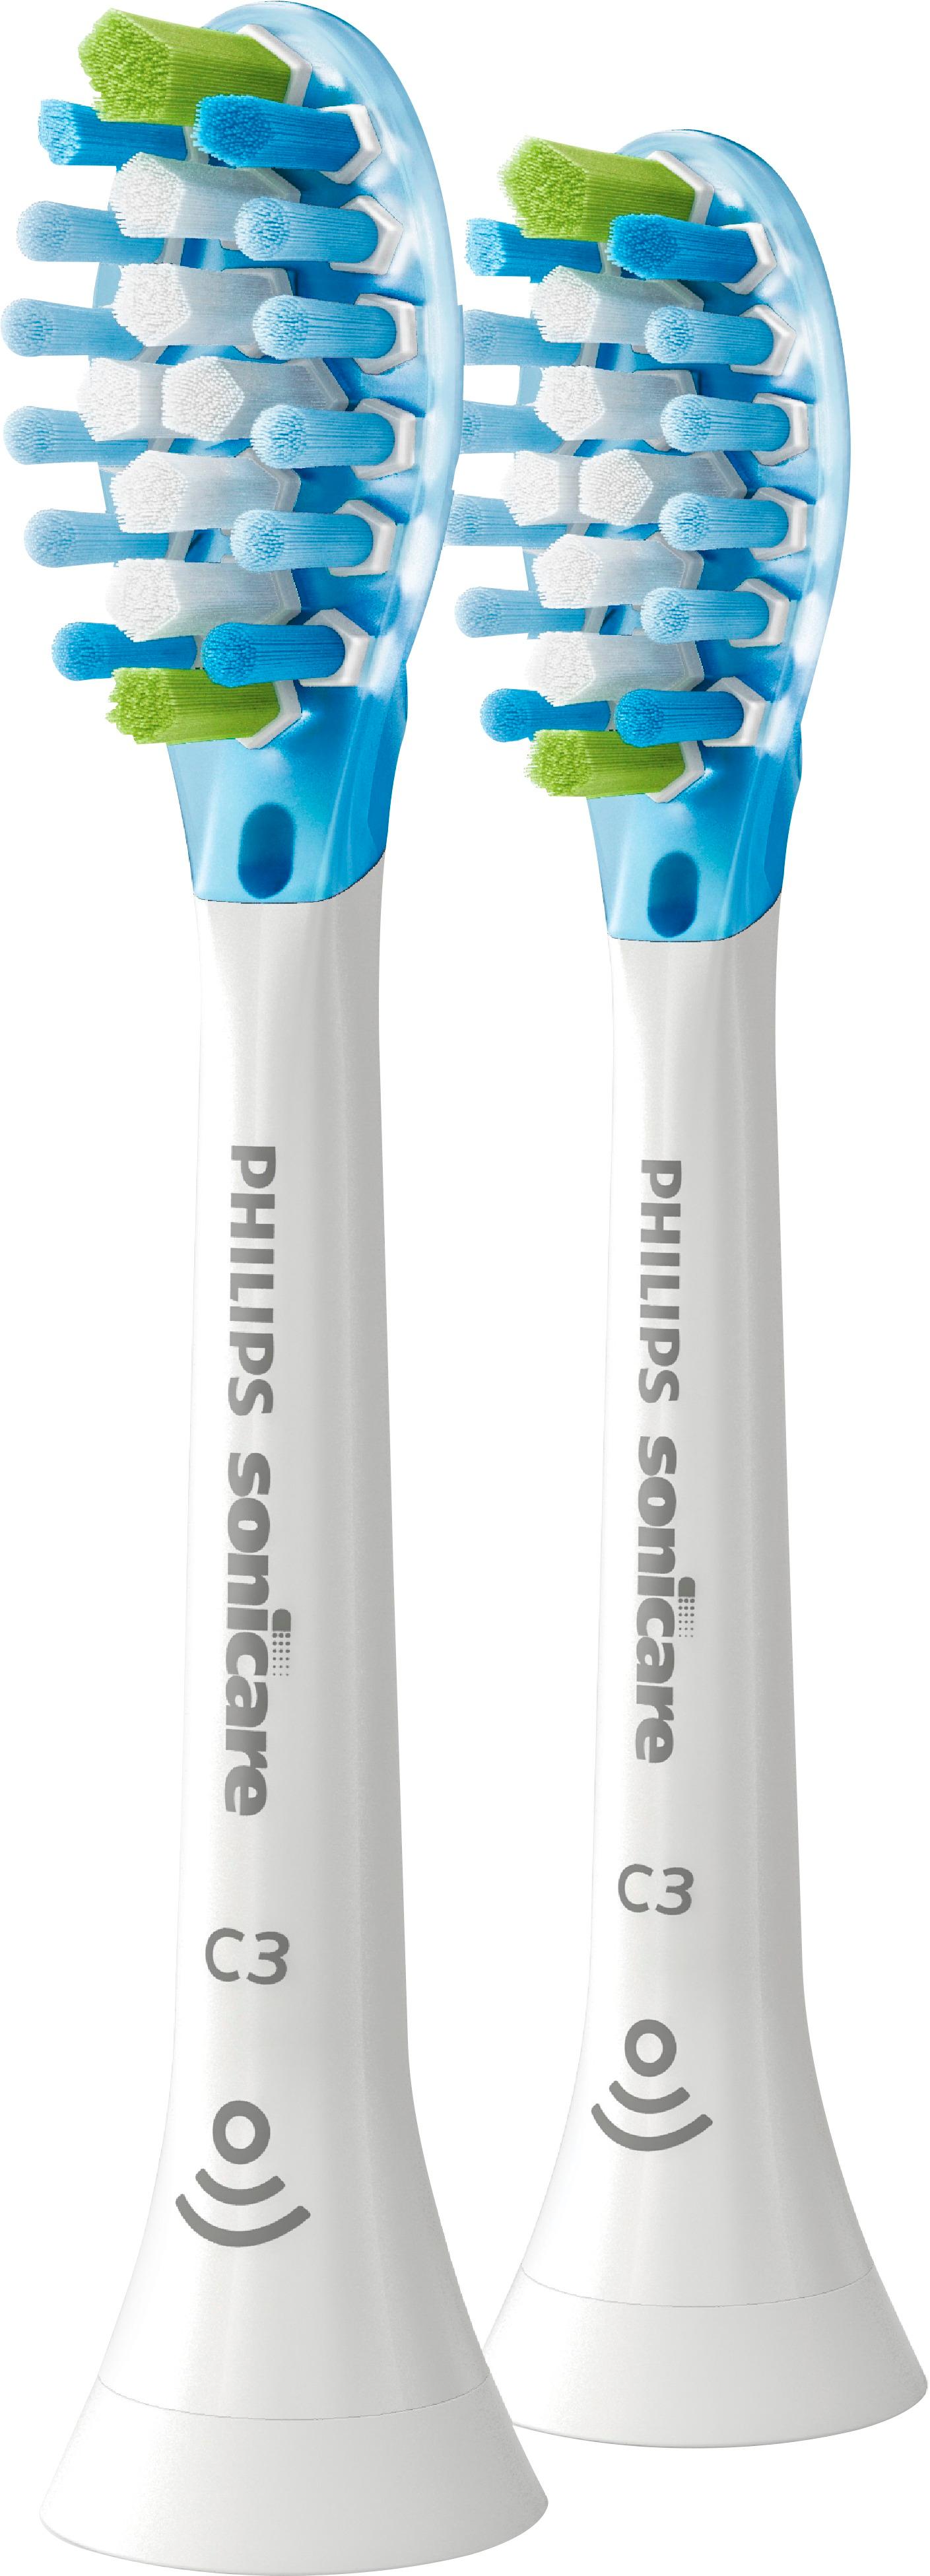 Philips Sonicare Premium All-in-One (A3) Replacement Toothbrush Heads,  (2-pack) Black HX9092/95 - Best Buy